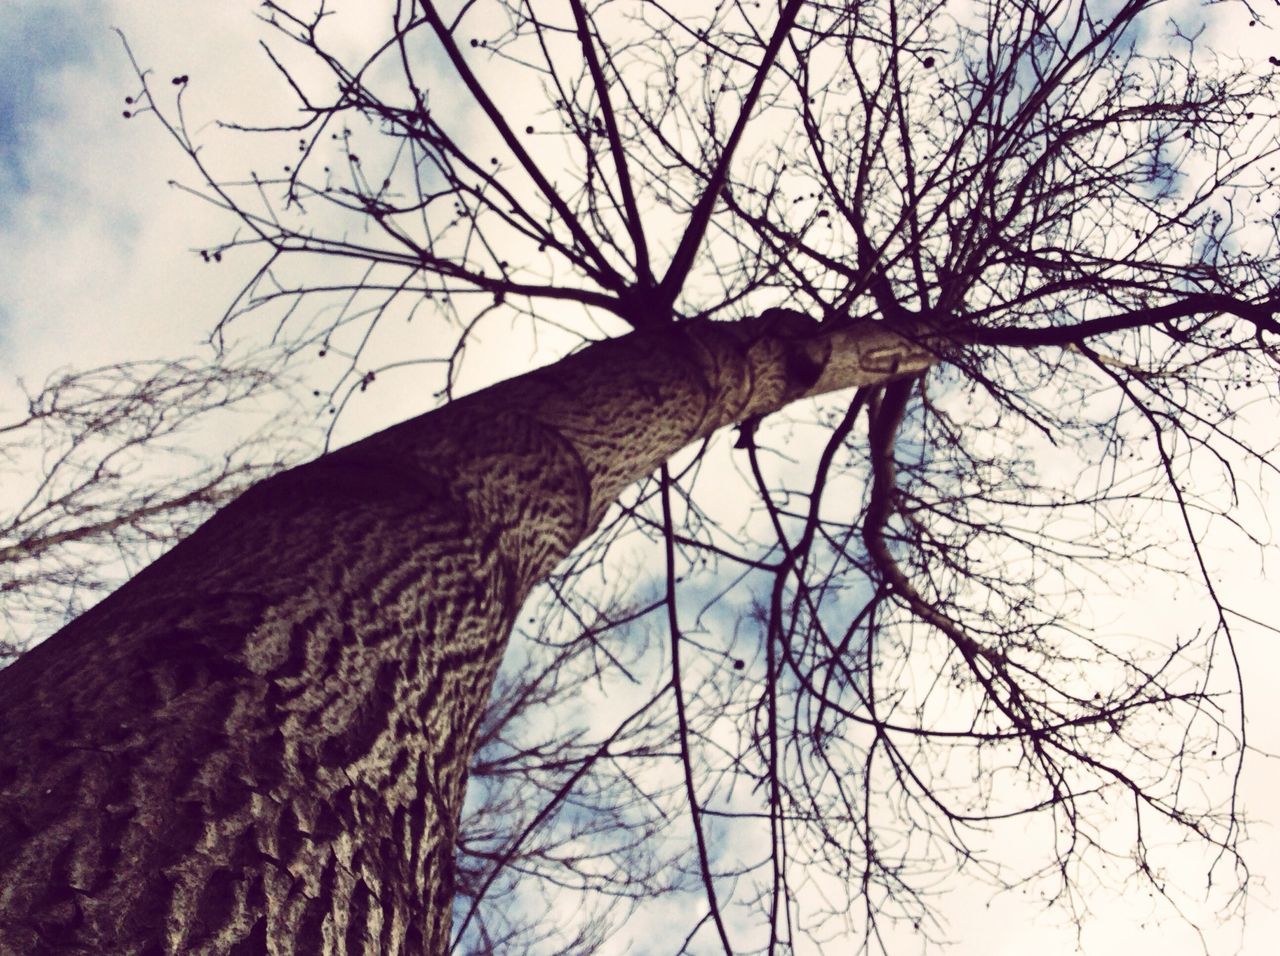 bare tree, branch, tree, low angle view, sky, tree trunk, tranquility, nature, dead plant, outdoors, beauty in nature, no people, day, scenics, cloud - sky, silhouette, tranquil scene, dried plant, growth, cloud